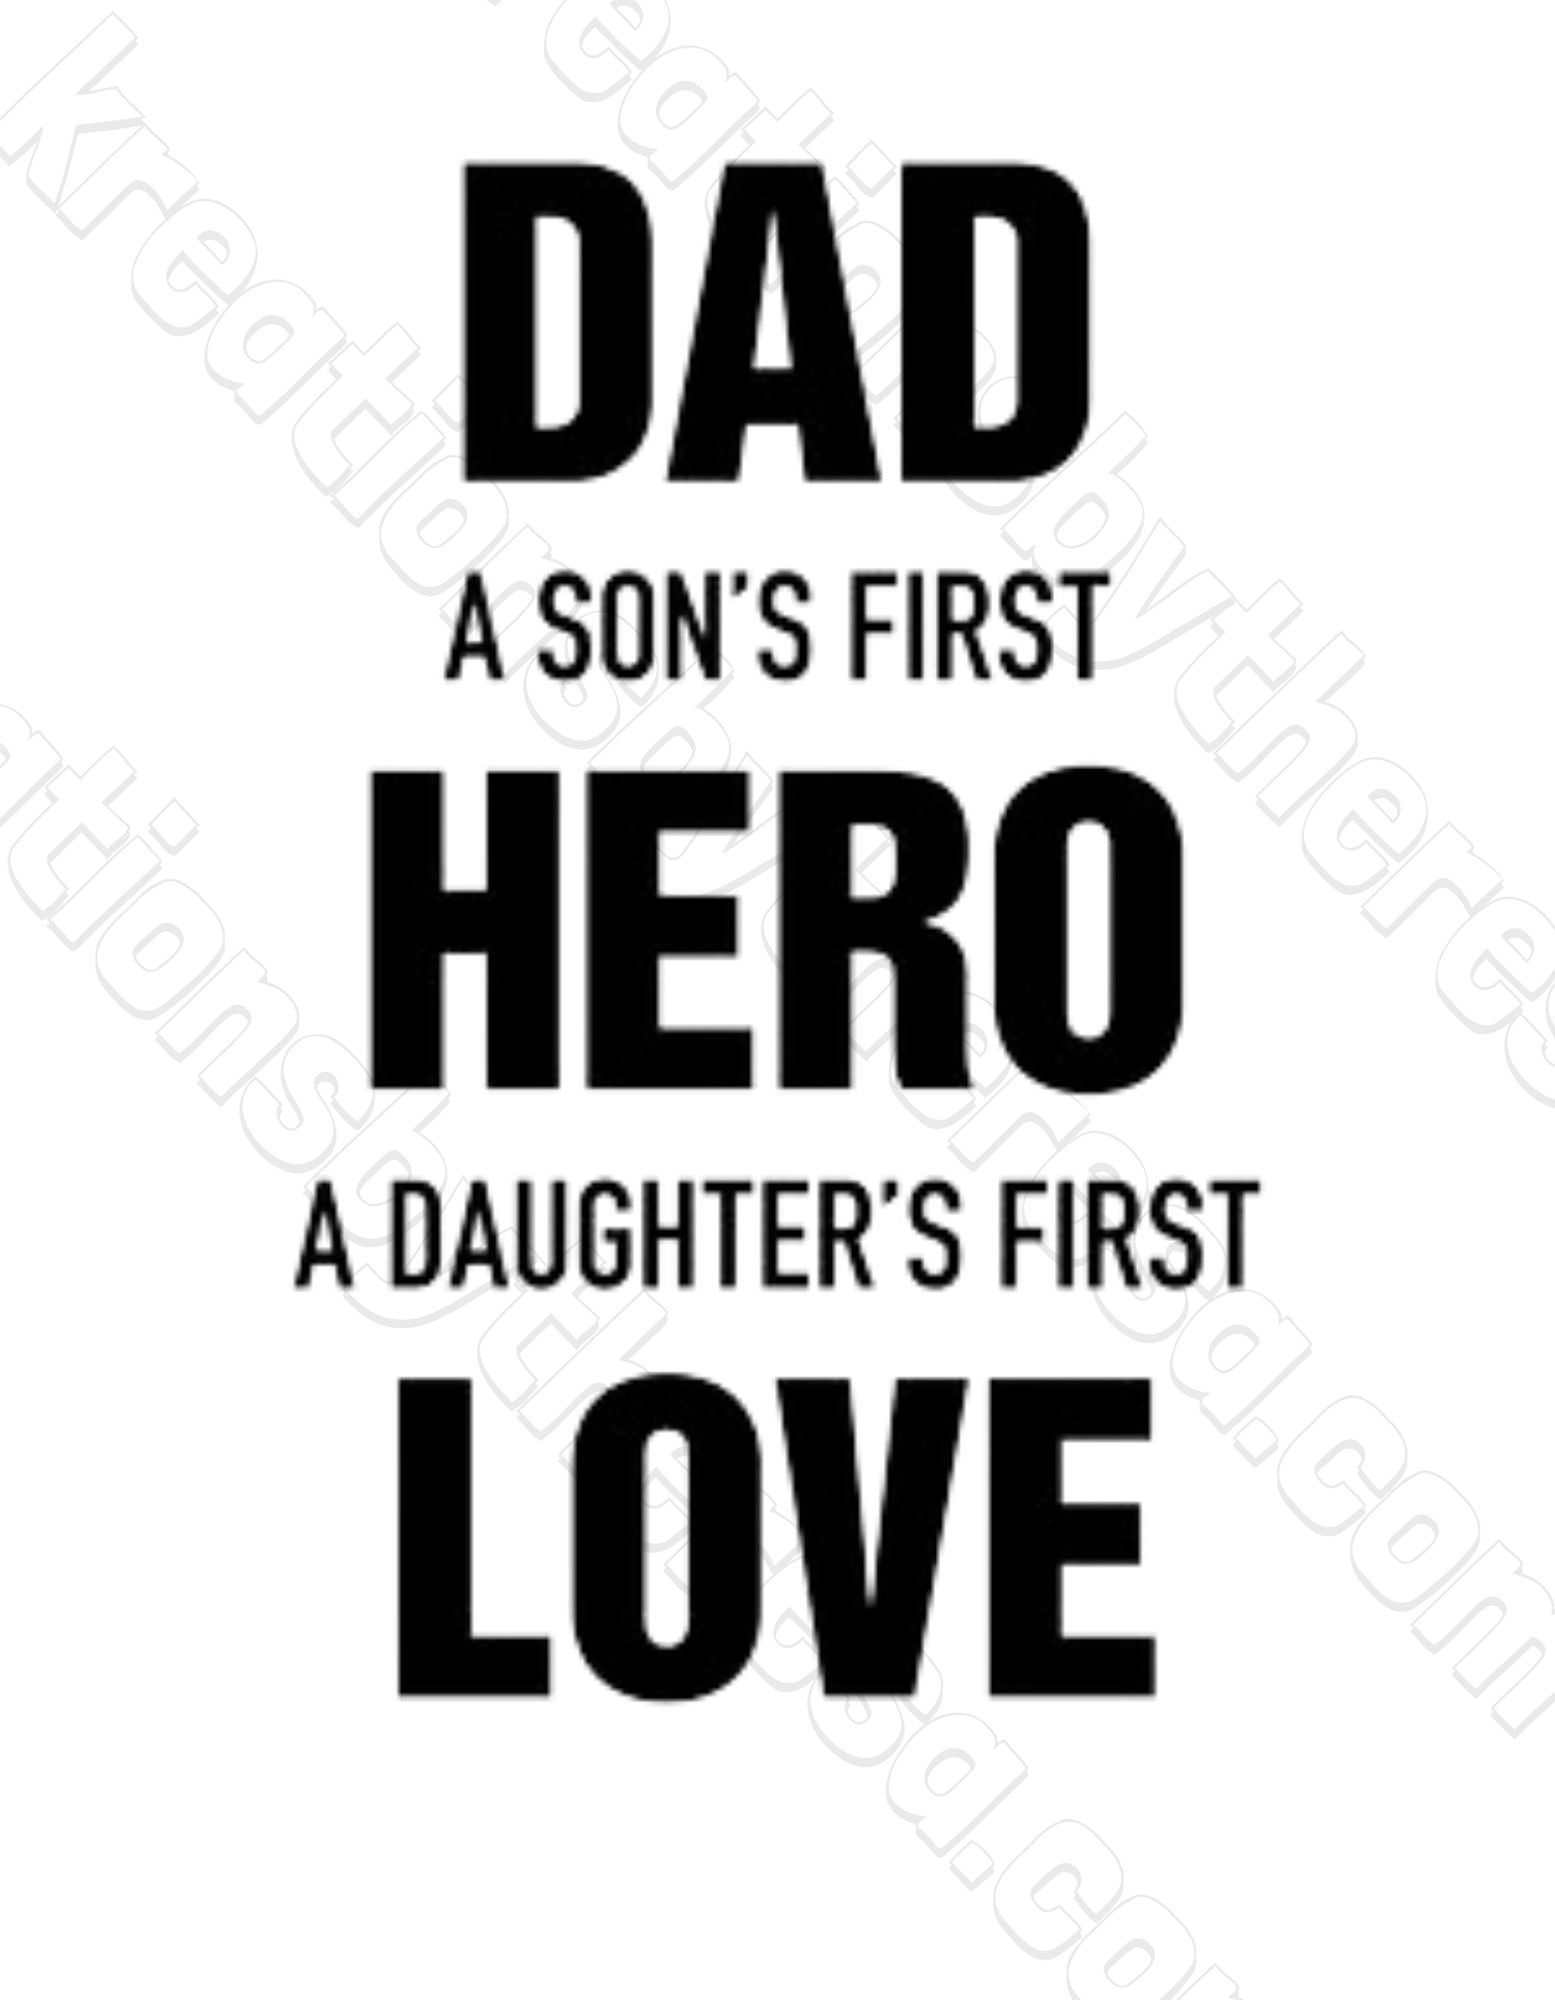 Dad a son's first hero a daughters first love| Printable Transfer For Diy